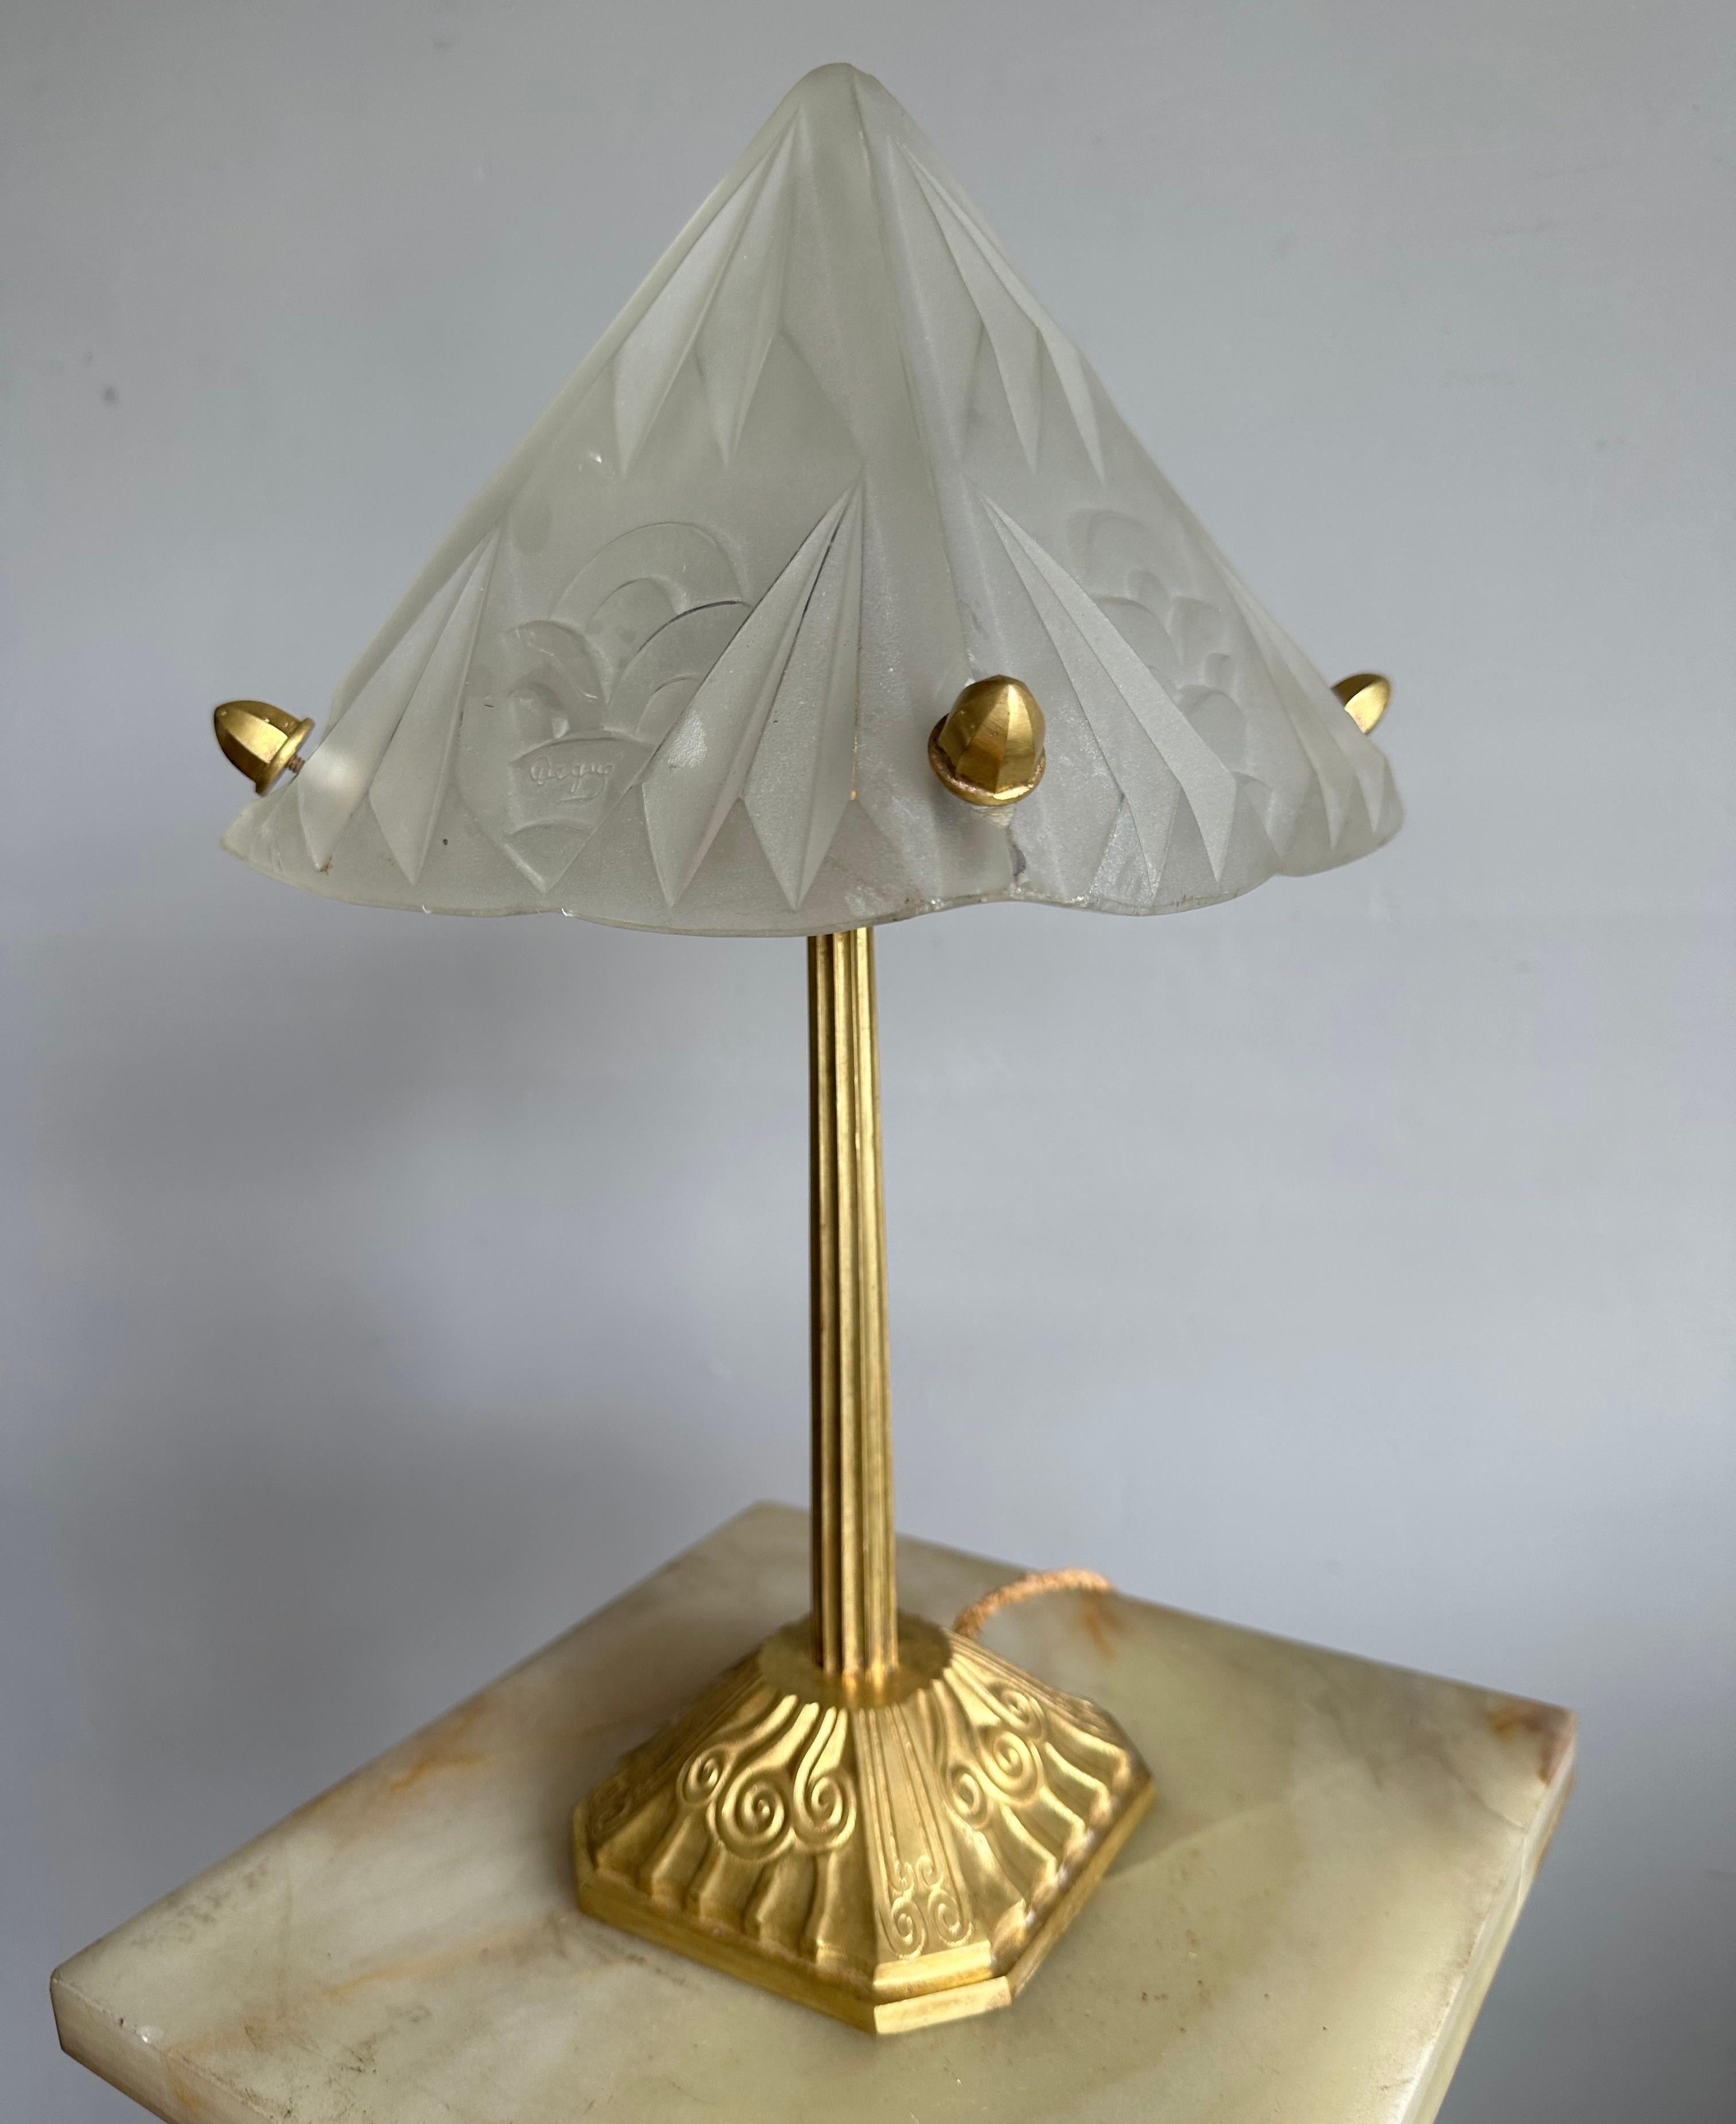 Wonderfully handcrafted 1920/1930 table or desk lamp for the perfect ambiance.

This rare and finer quality Art Deco table lamp was realized by the fabled glass studio, Degue in France, in circa 1920/1930. It features a beautiful edited with cubist